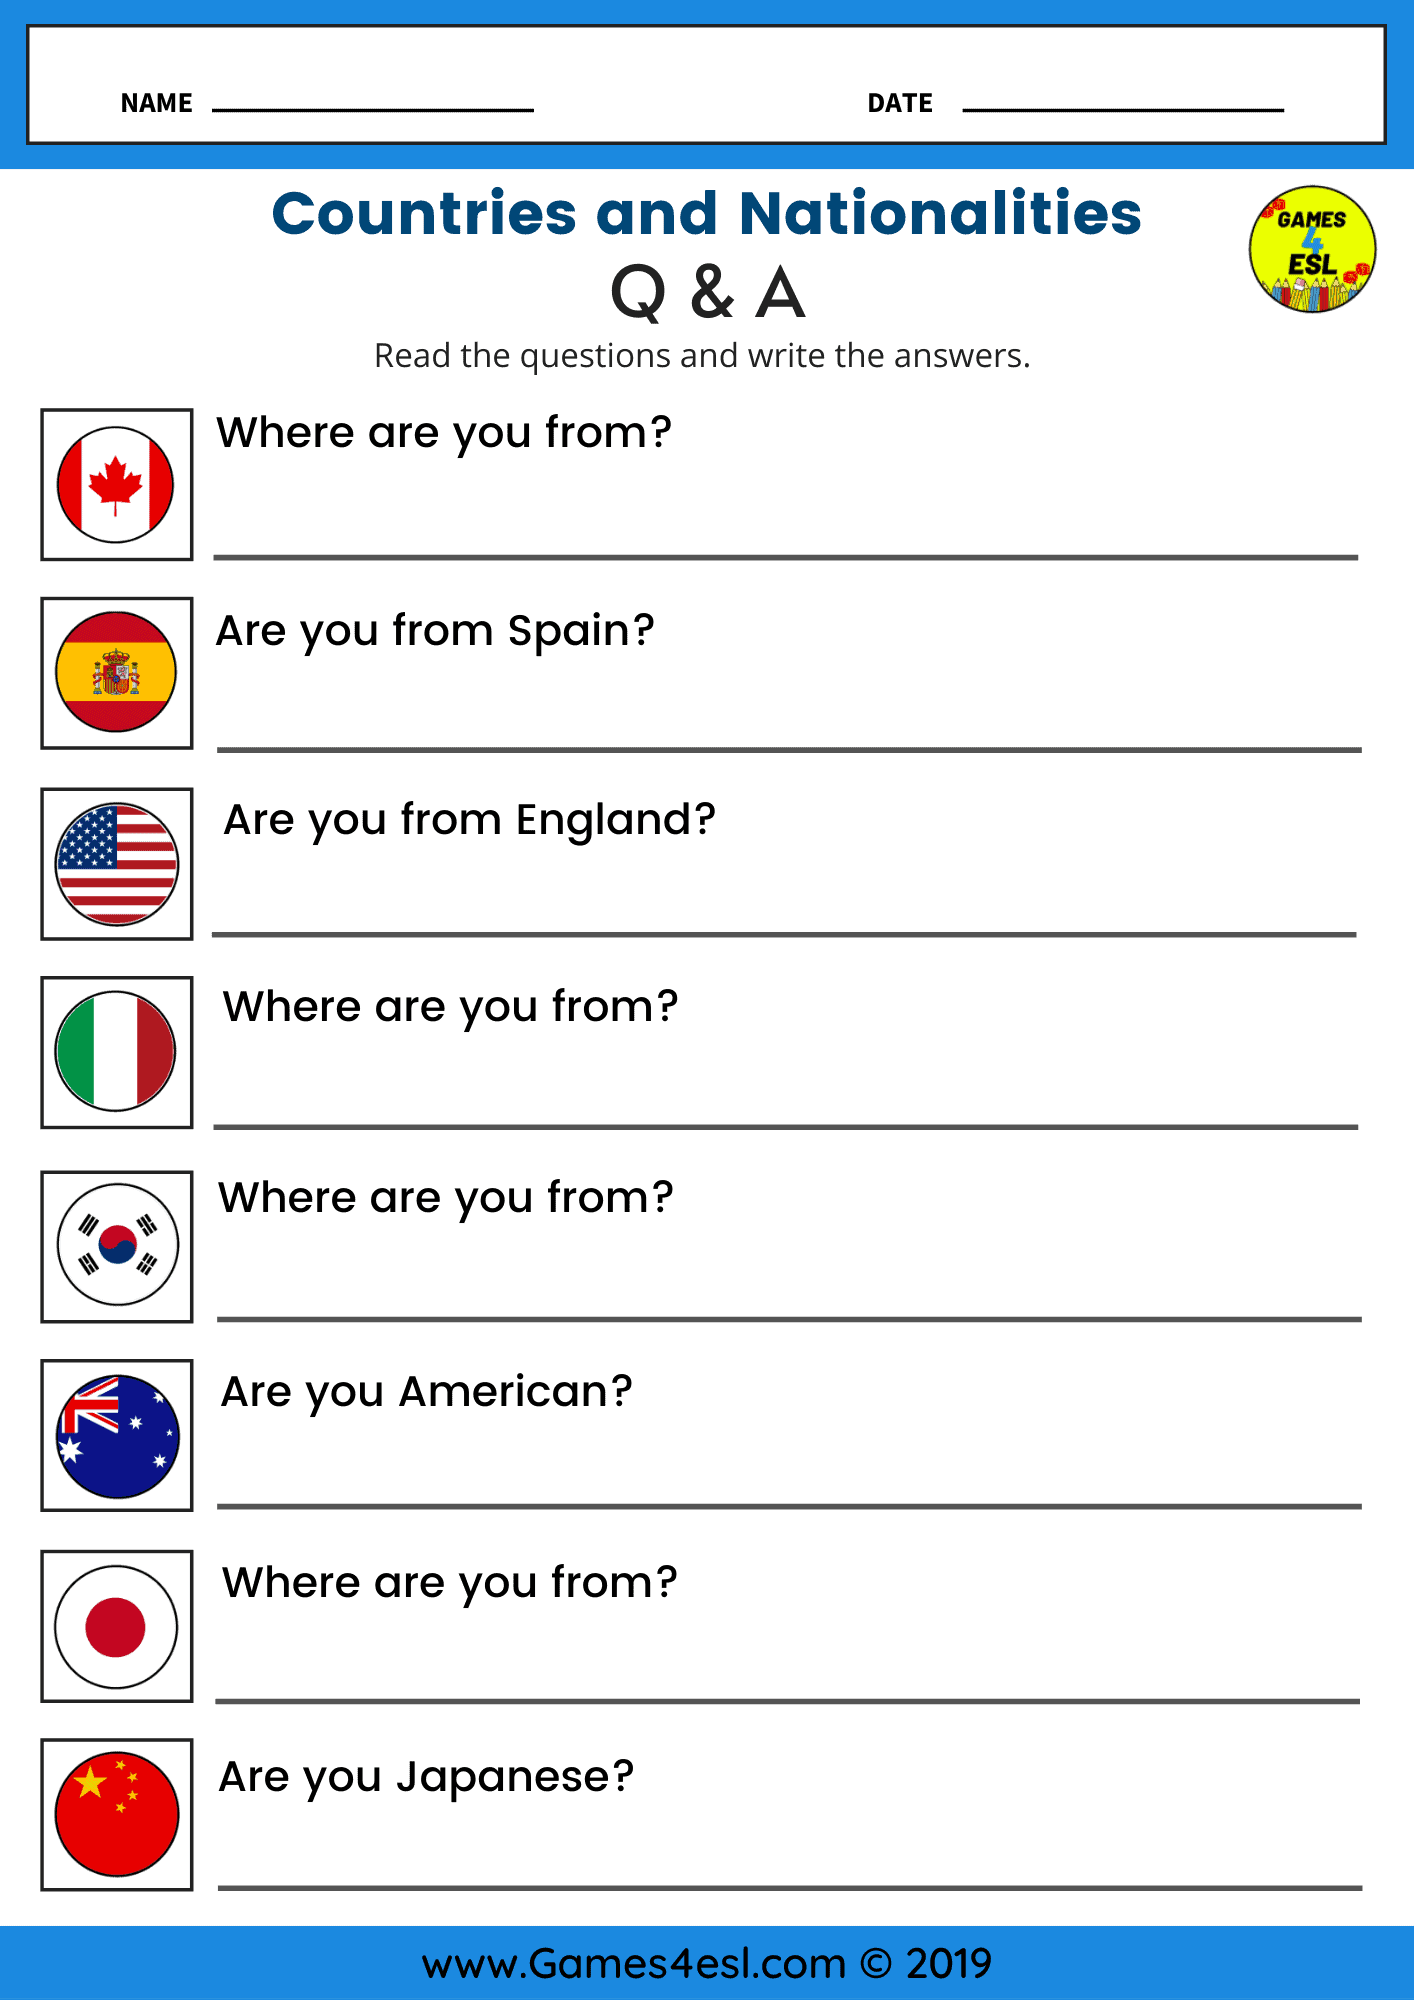 countries-and-nationalities-worksheets-games4esl